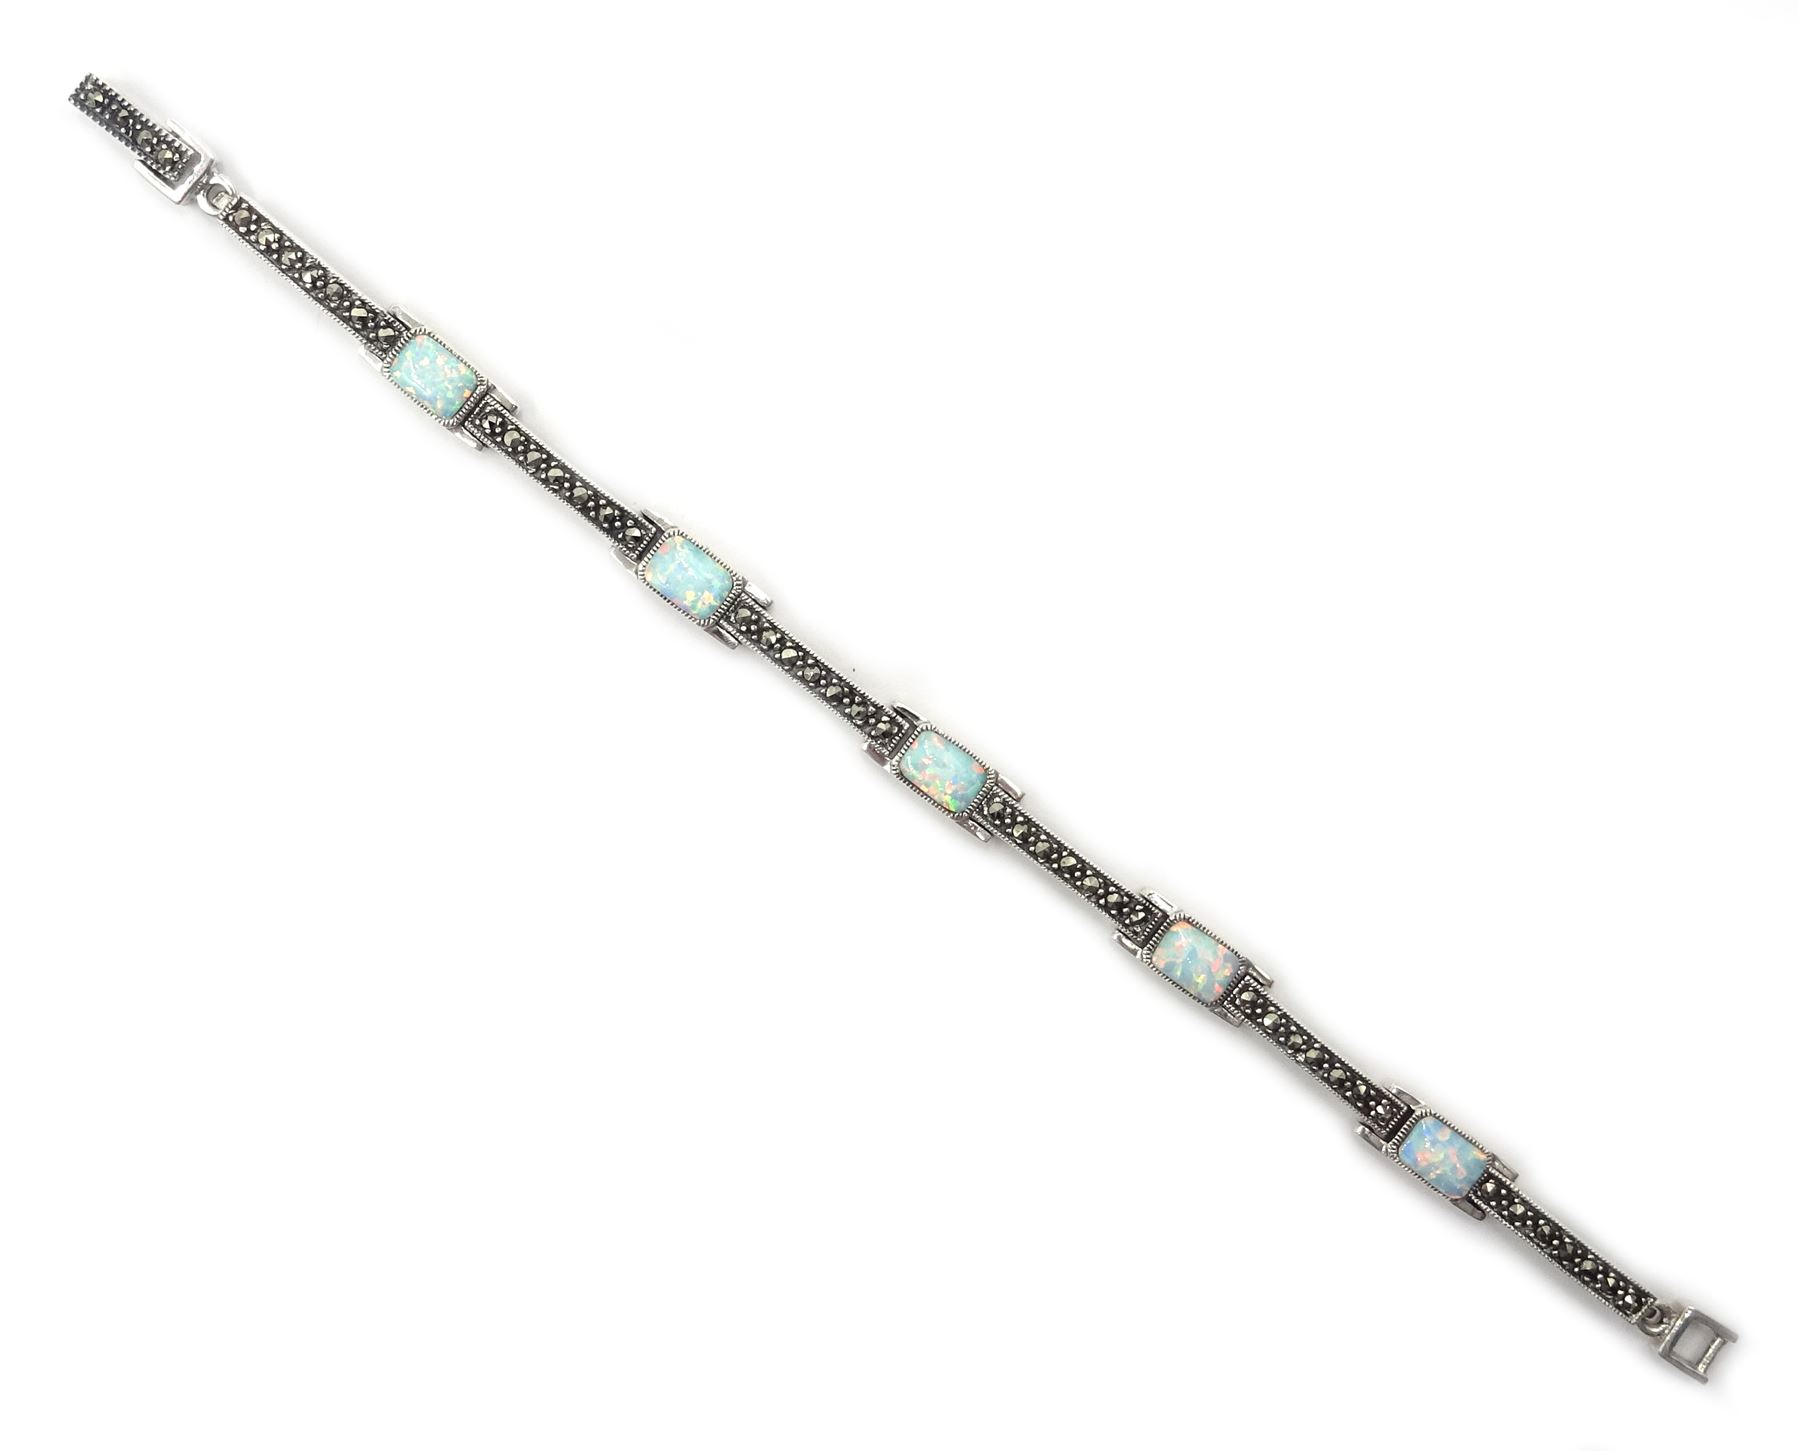 Silver opal and marcasite link bracelet - Image 3 of 3